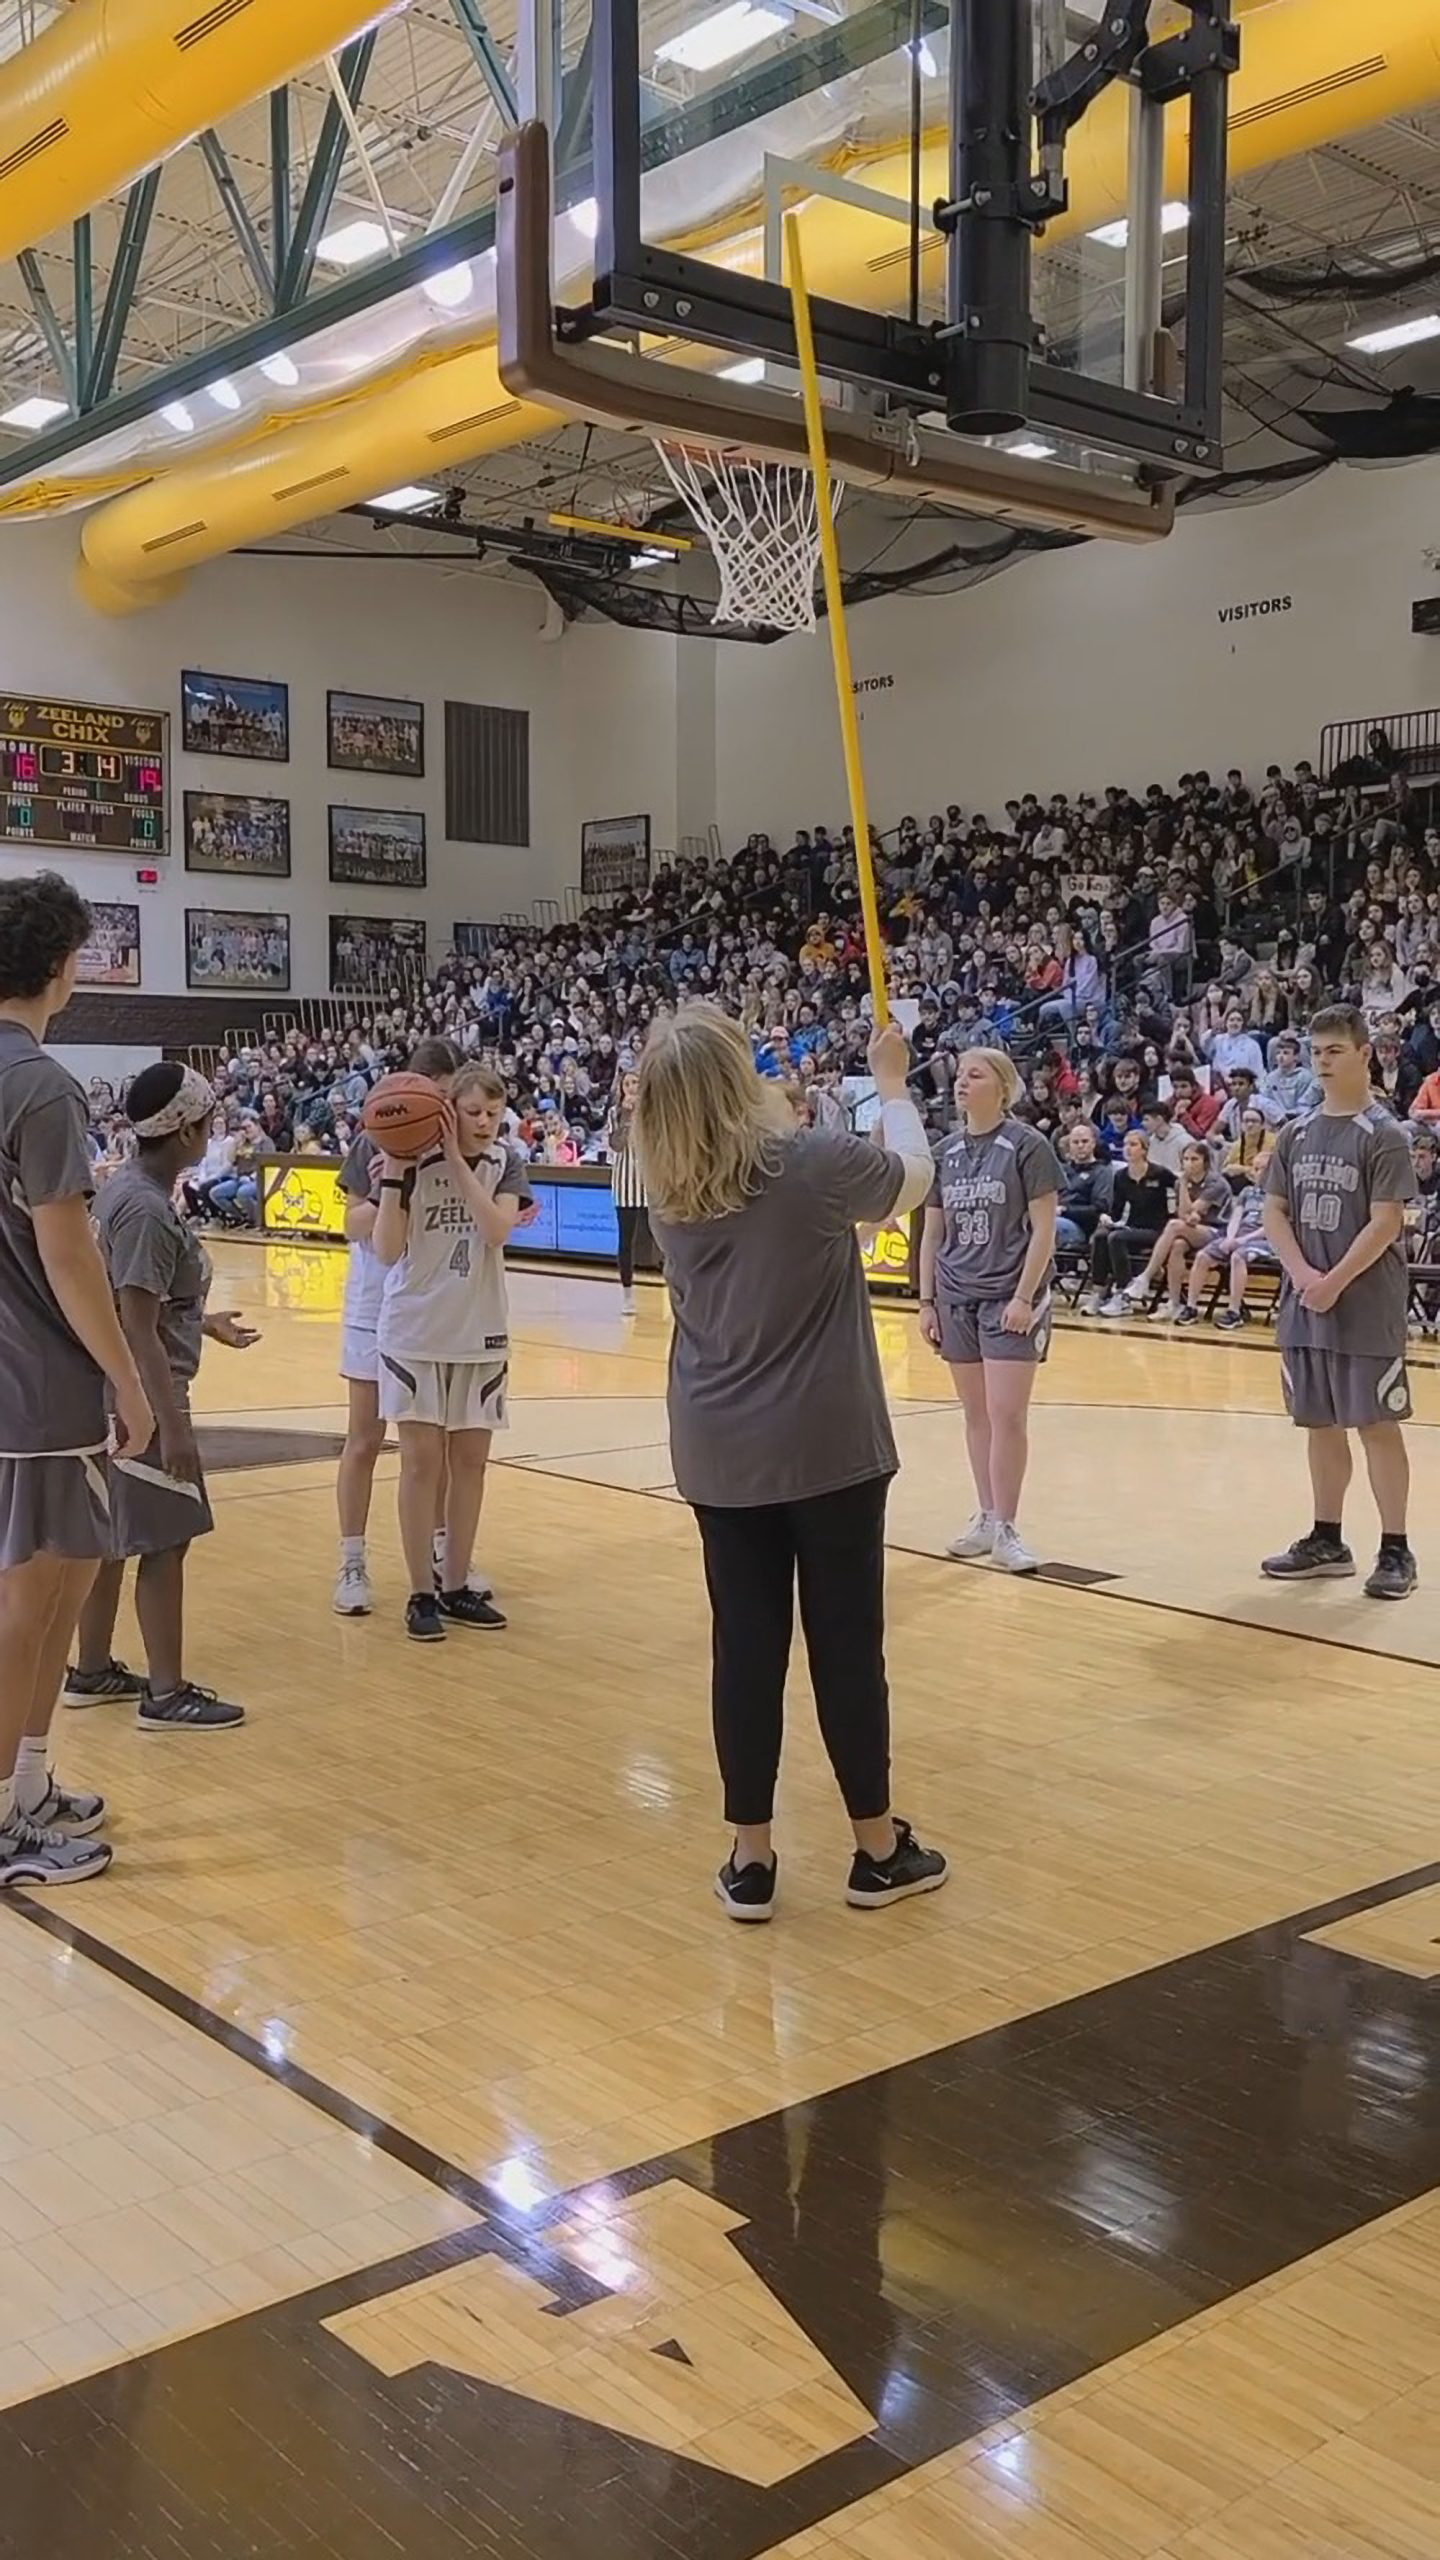 Read more about the article Crowd Erupts In Thunderous Cheer As Blind Student Sinks Basketball Shot